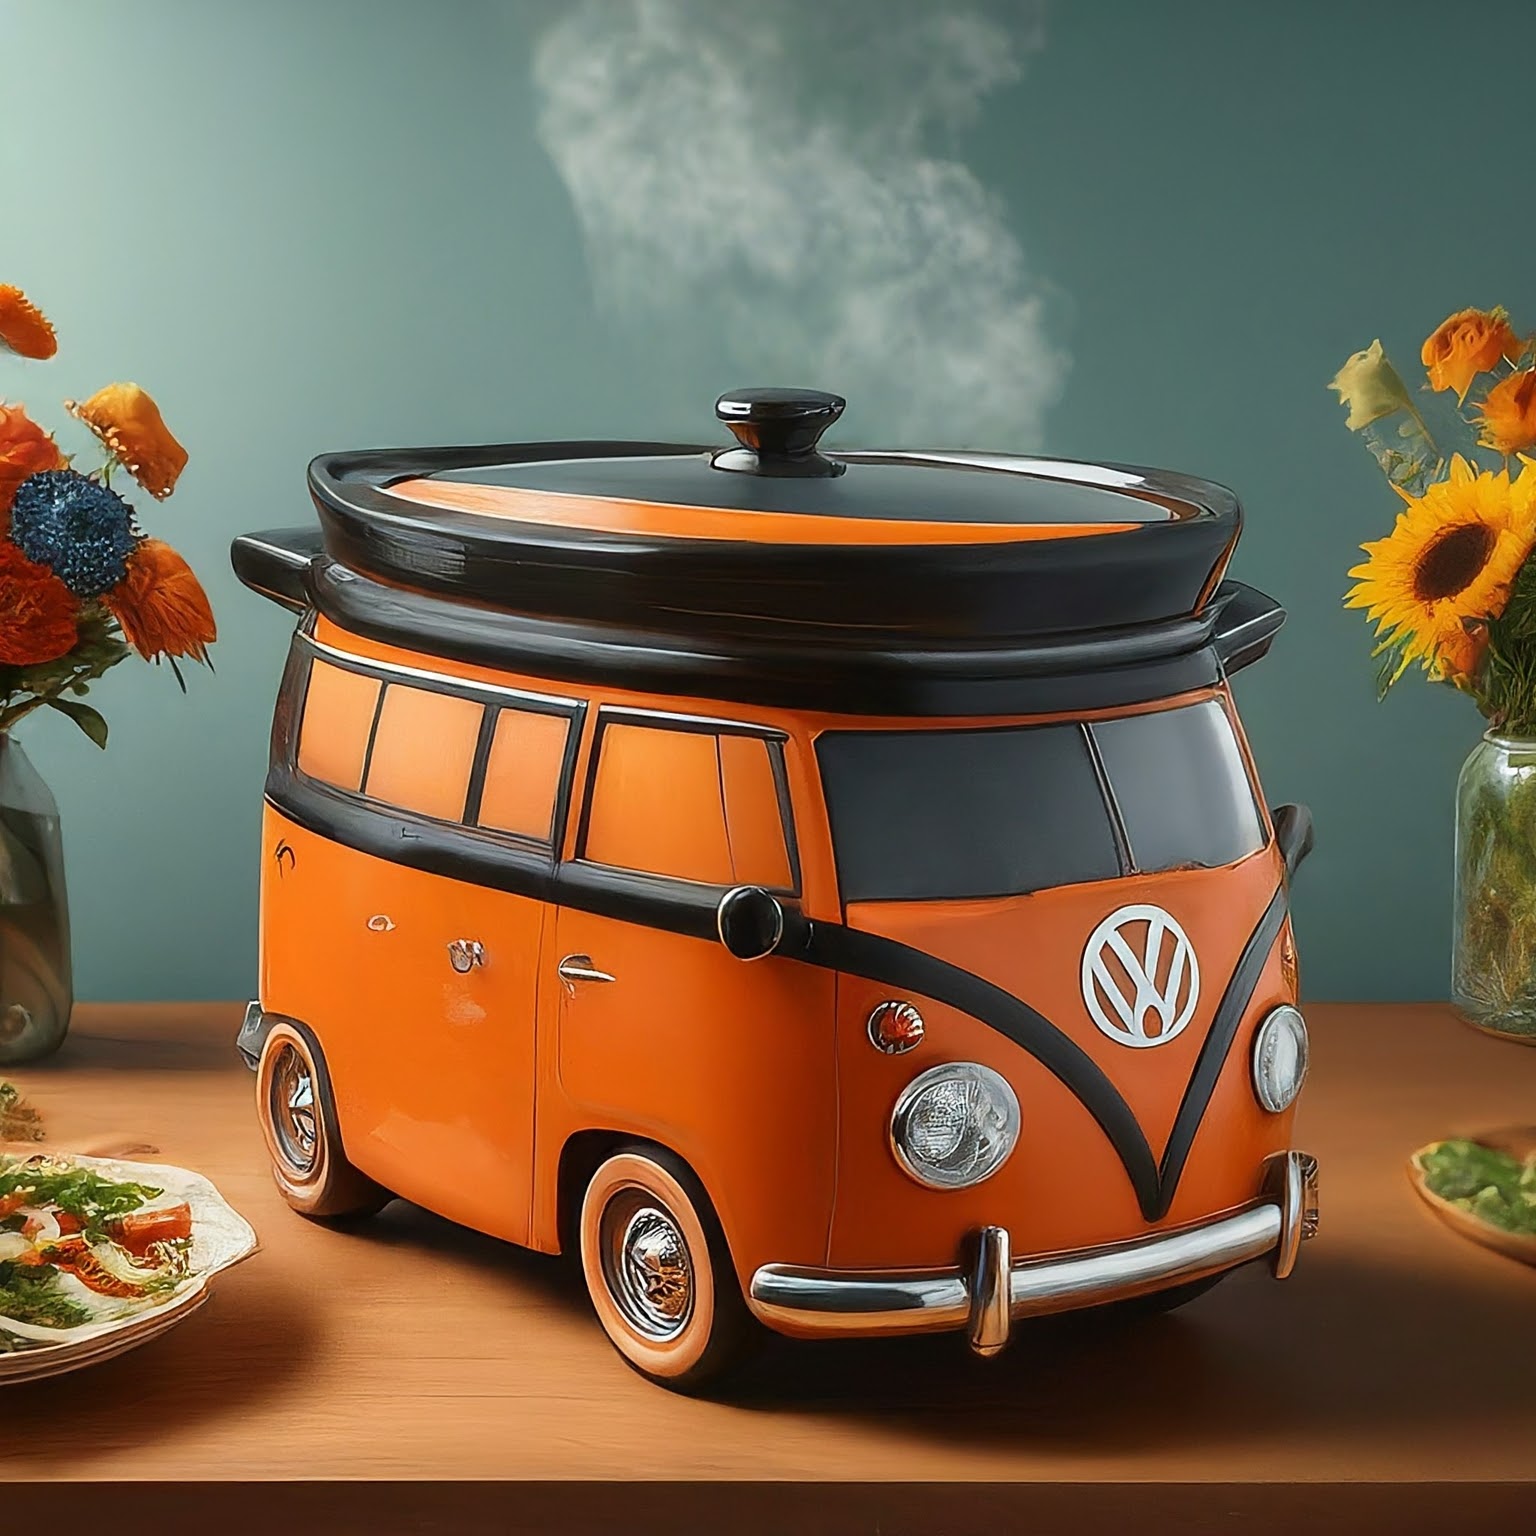 Volkswagen Bus Shaped Slow Cookers: Infusing Retro Vibes into Your Kitchen Adventure luxarts volkswagen bus slow cookers 15